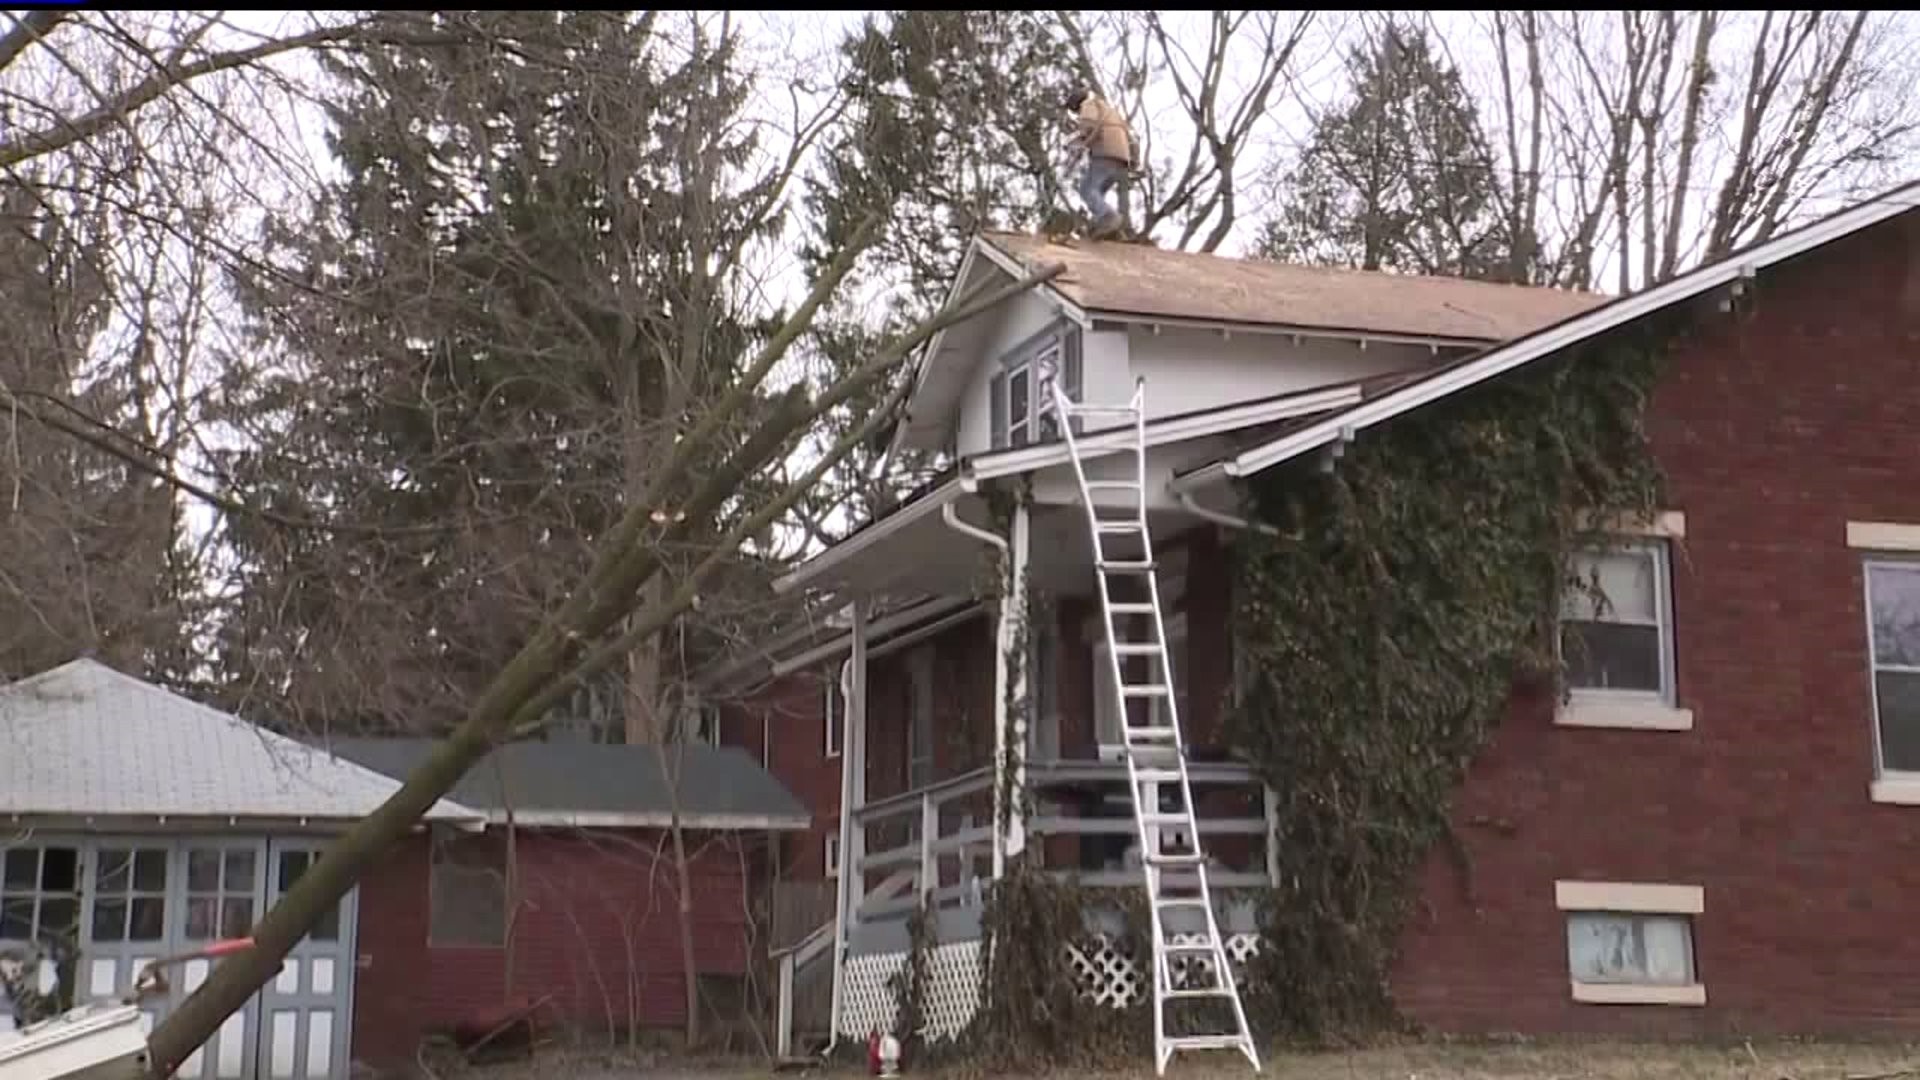 Windstorm damage keeping roofers busy